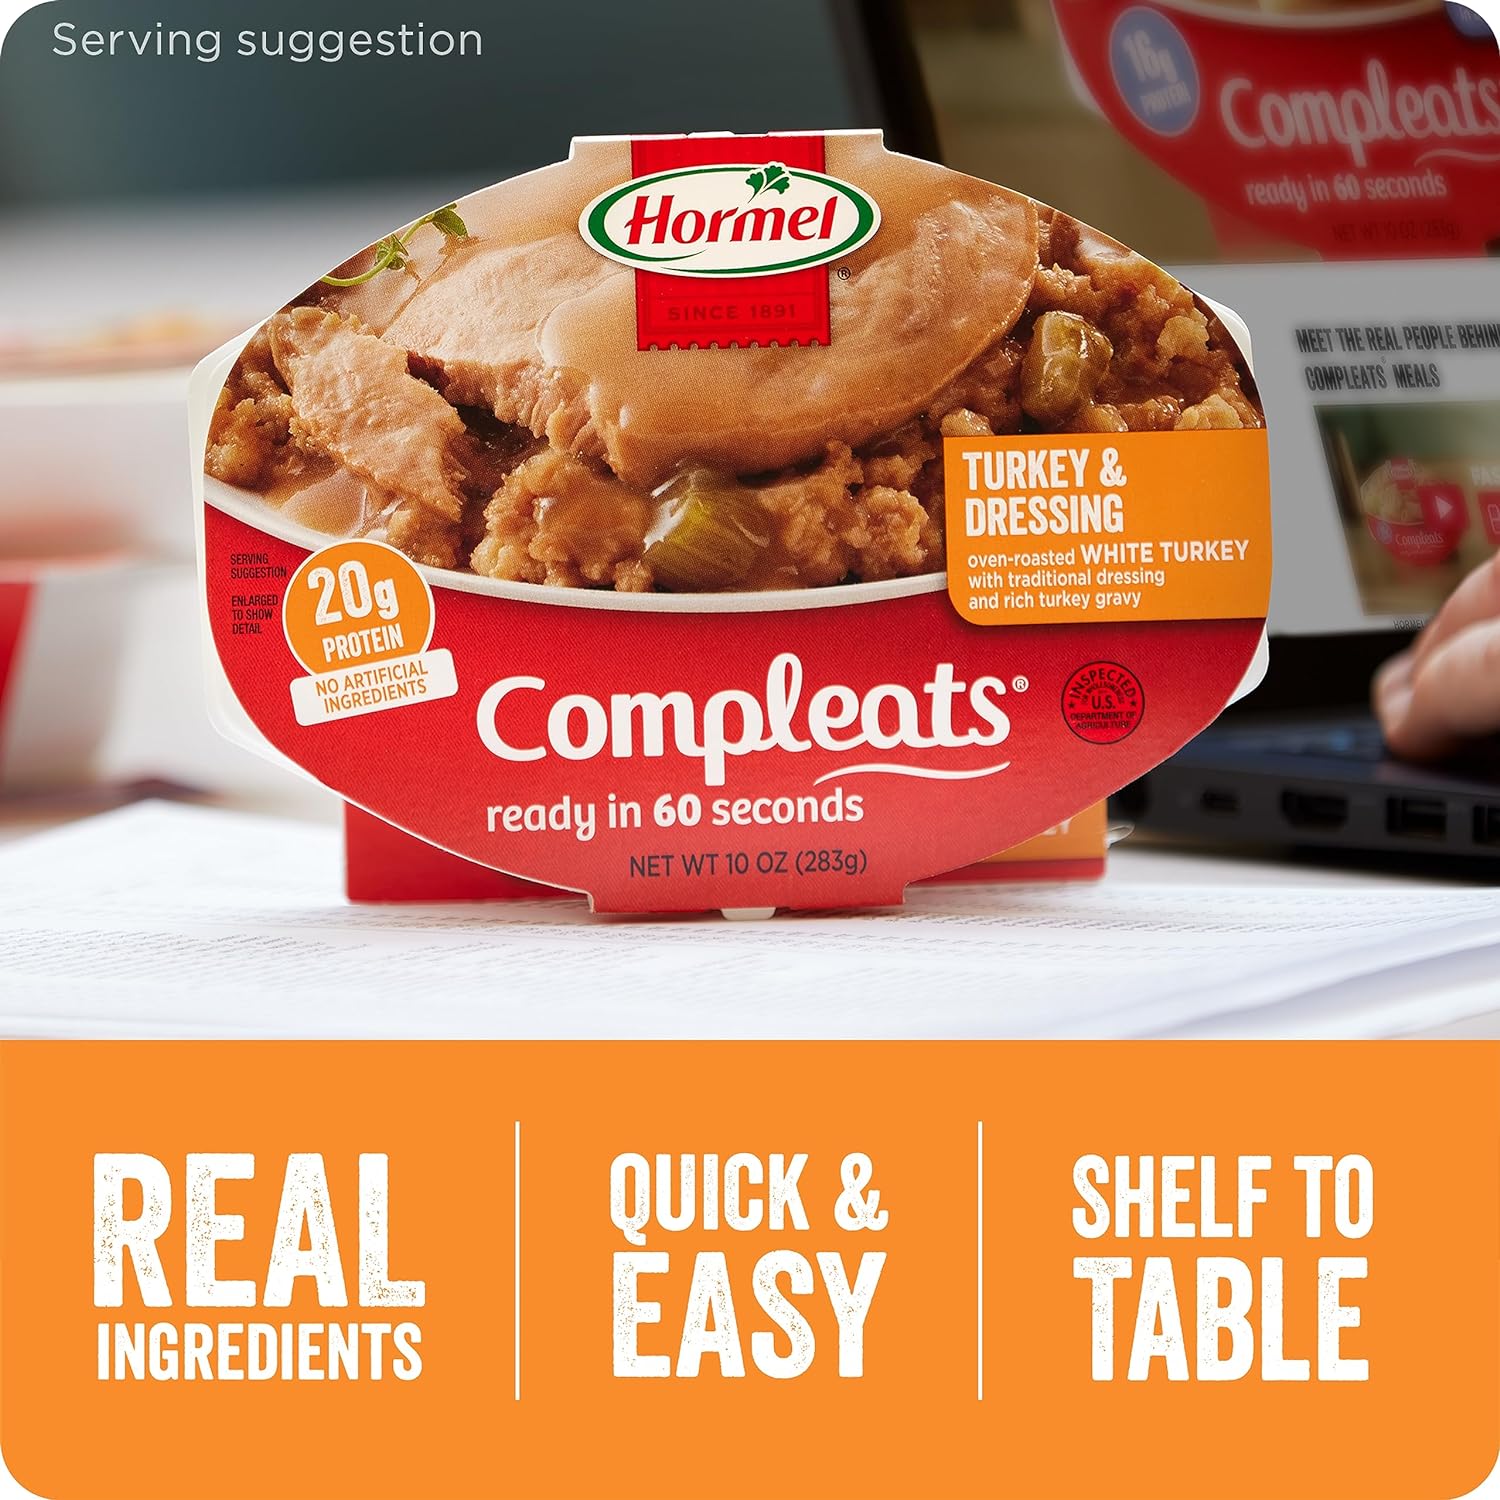 HORMEL COMPLEATS Turkey & Dressing Microwave Tray, 10 oz. (6 Pack)